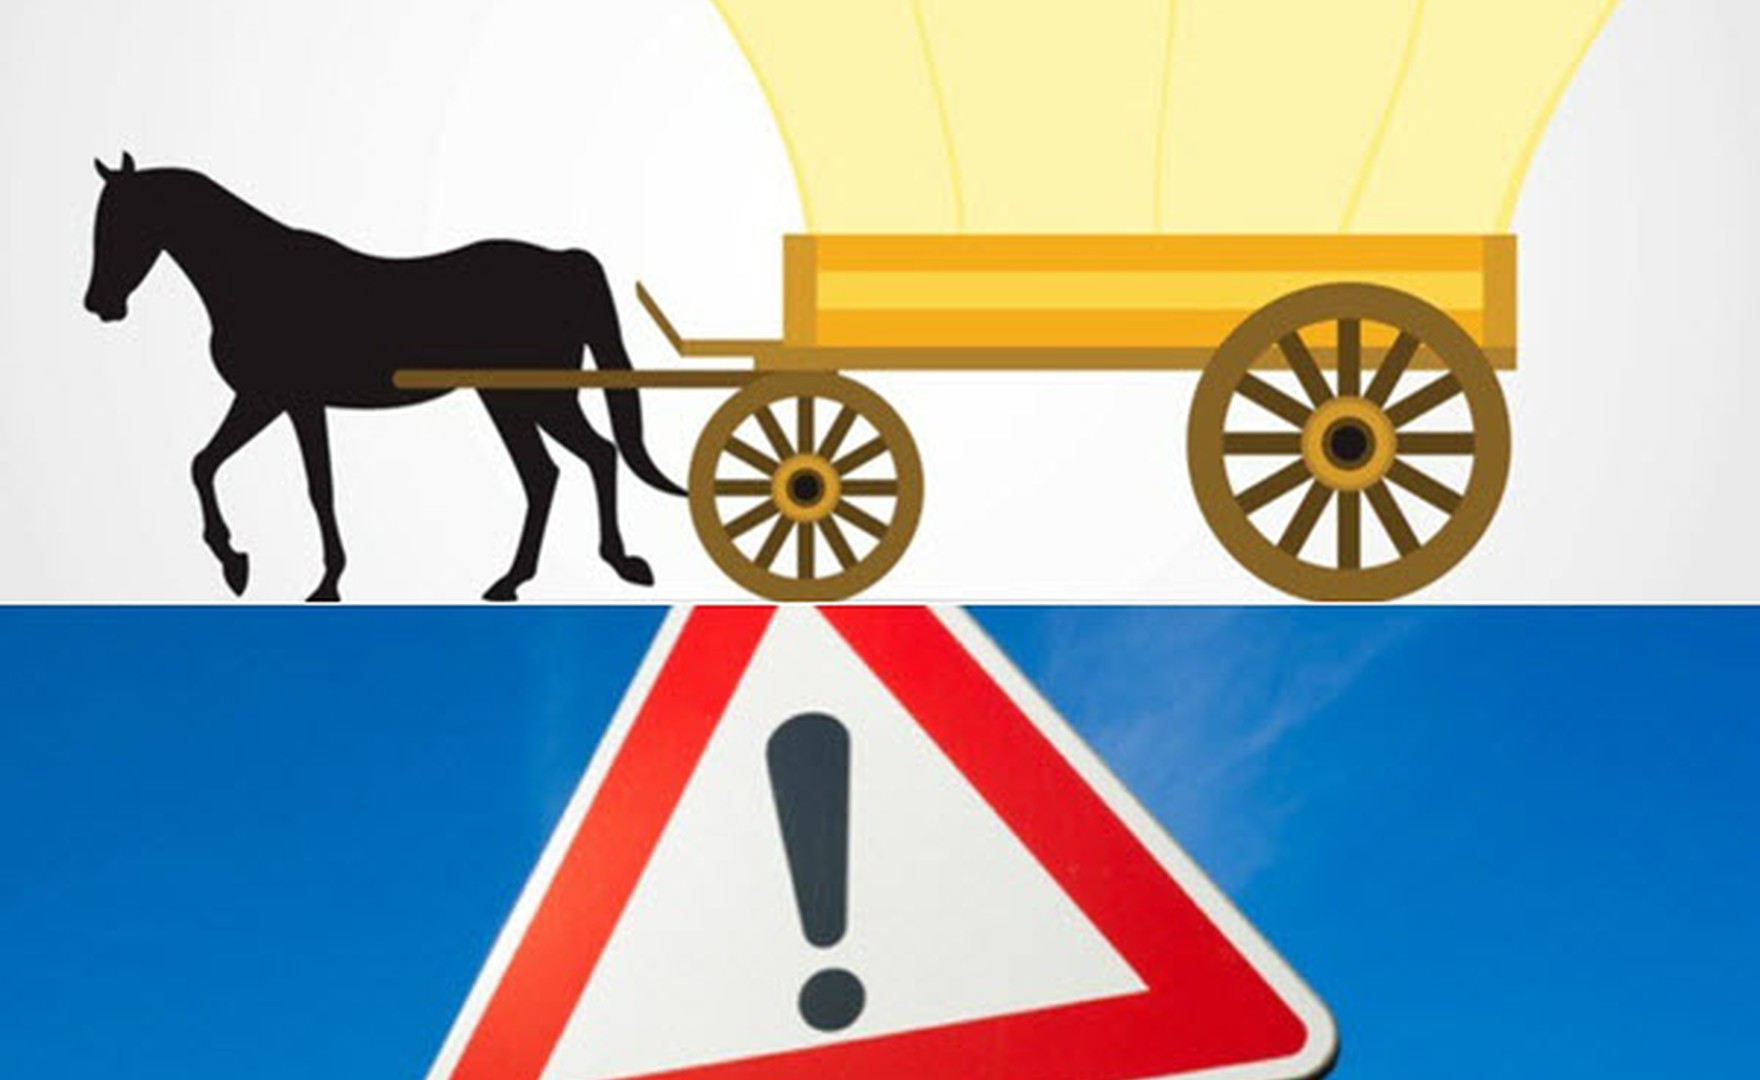 Mental Health and Coaching: Horse and Carriage? Or No-Go Zone?